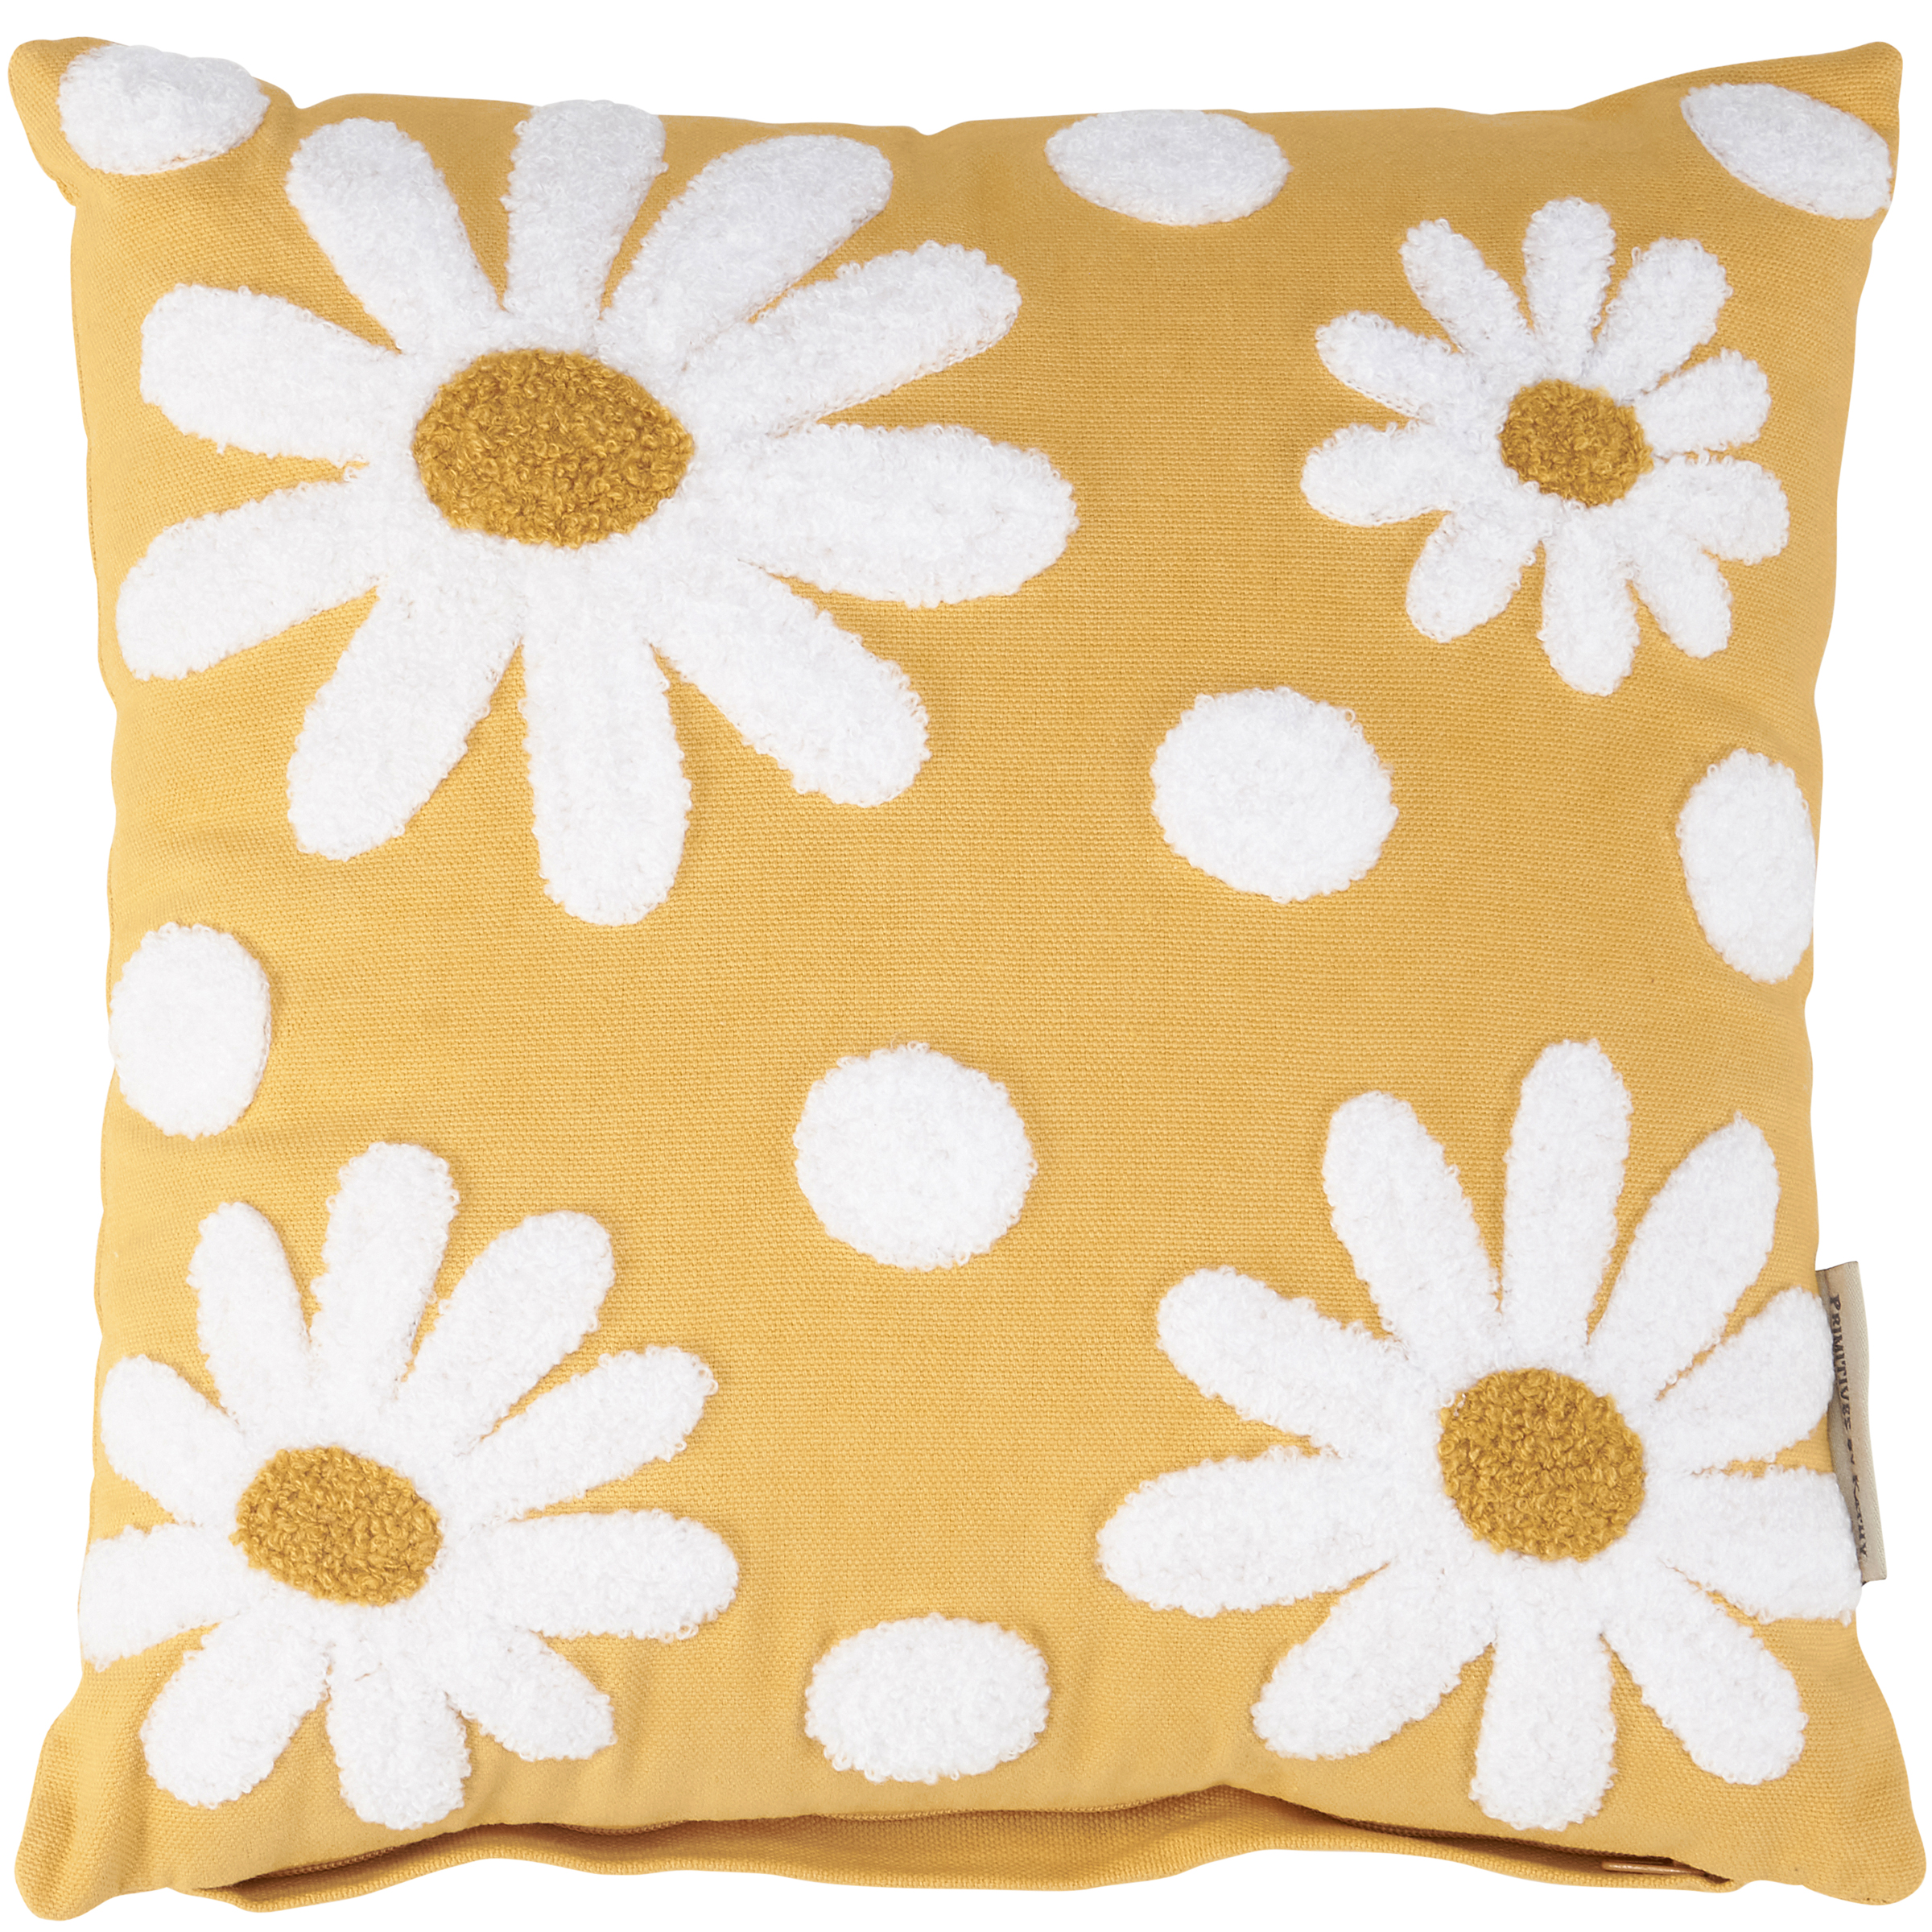 Tufted Daisy Pillow | Primitives By Kathy